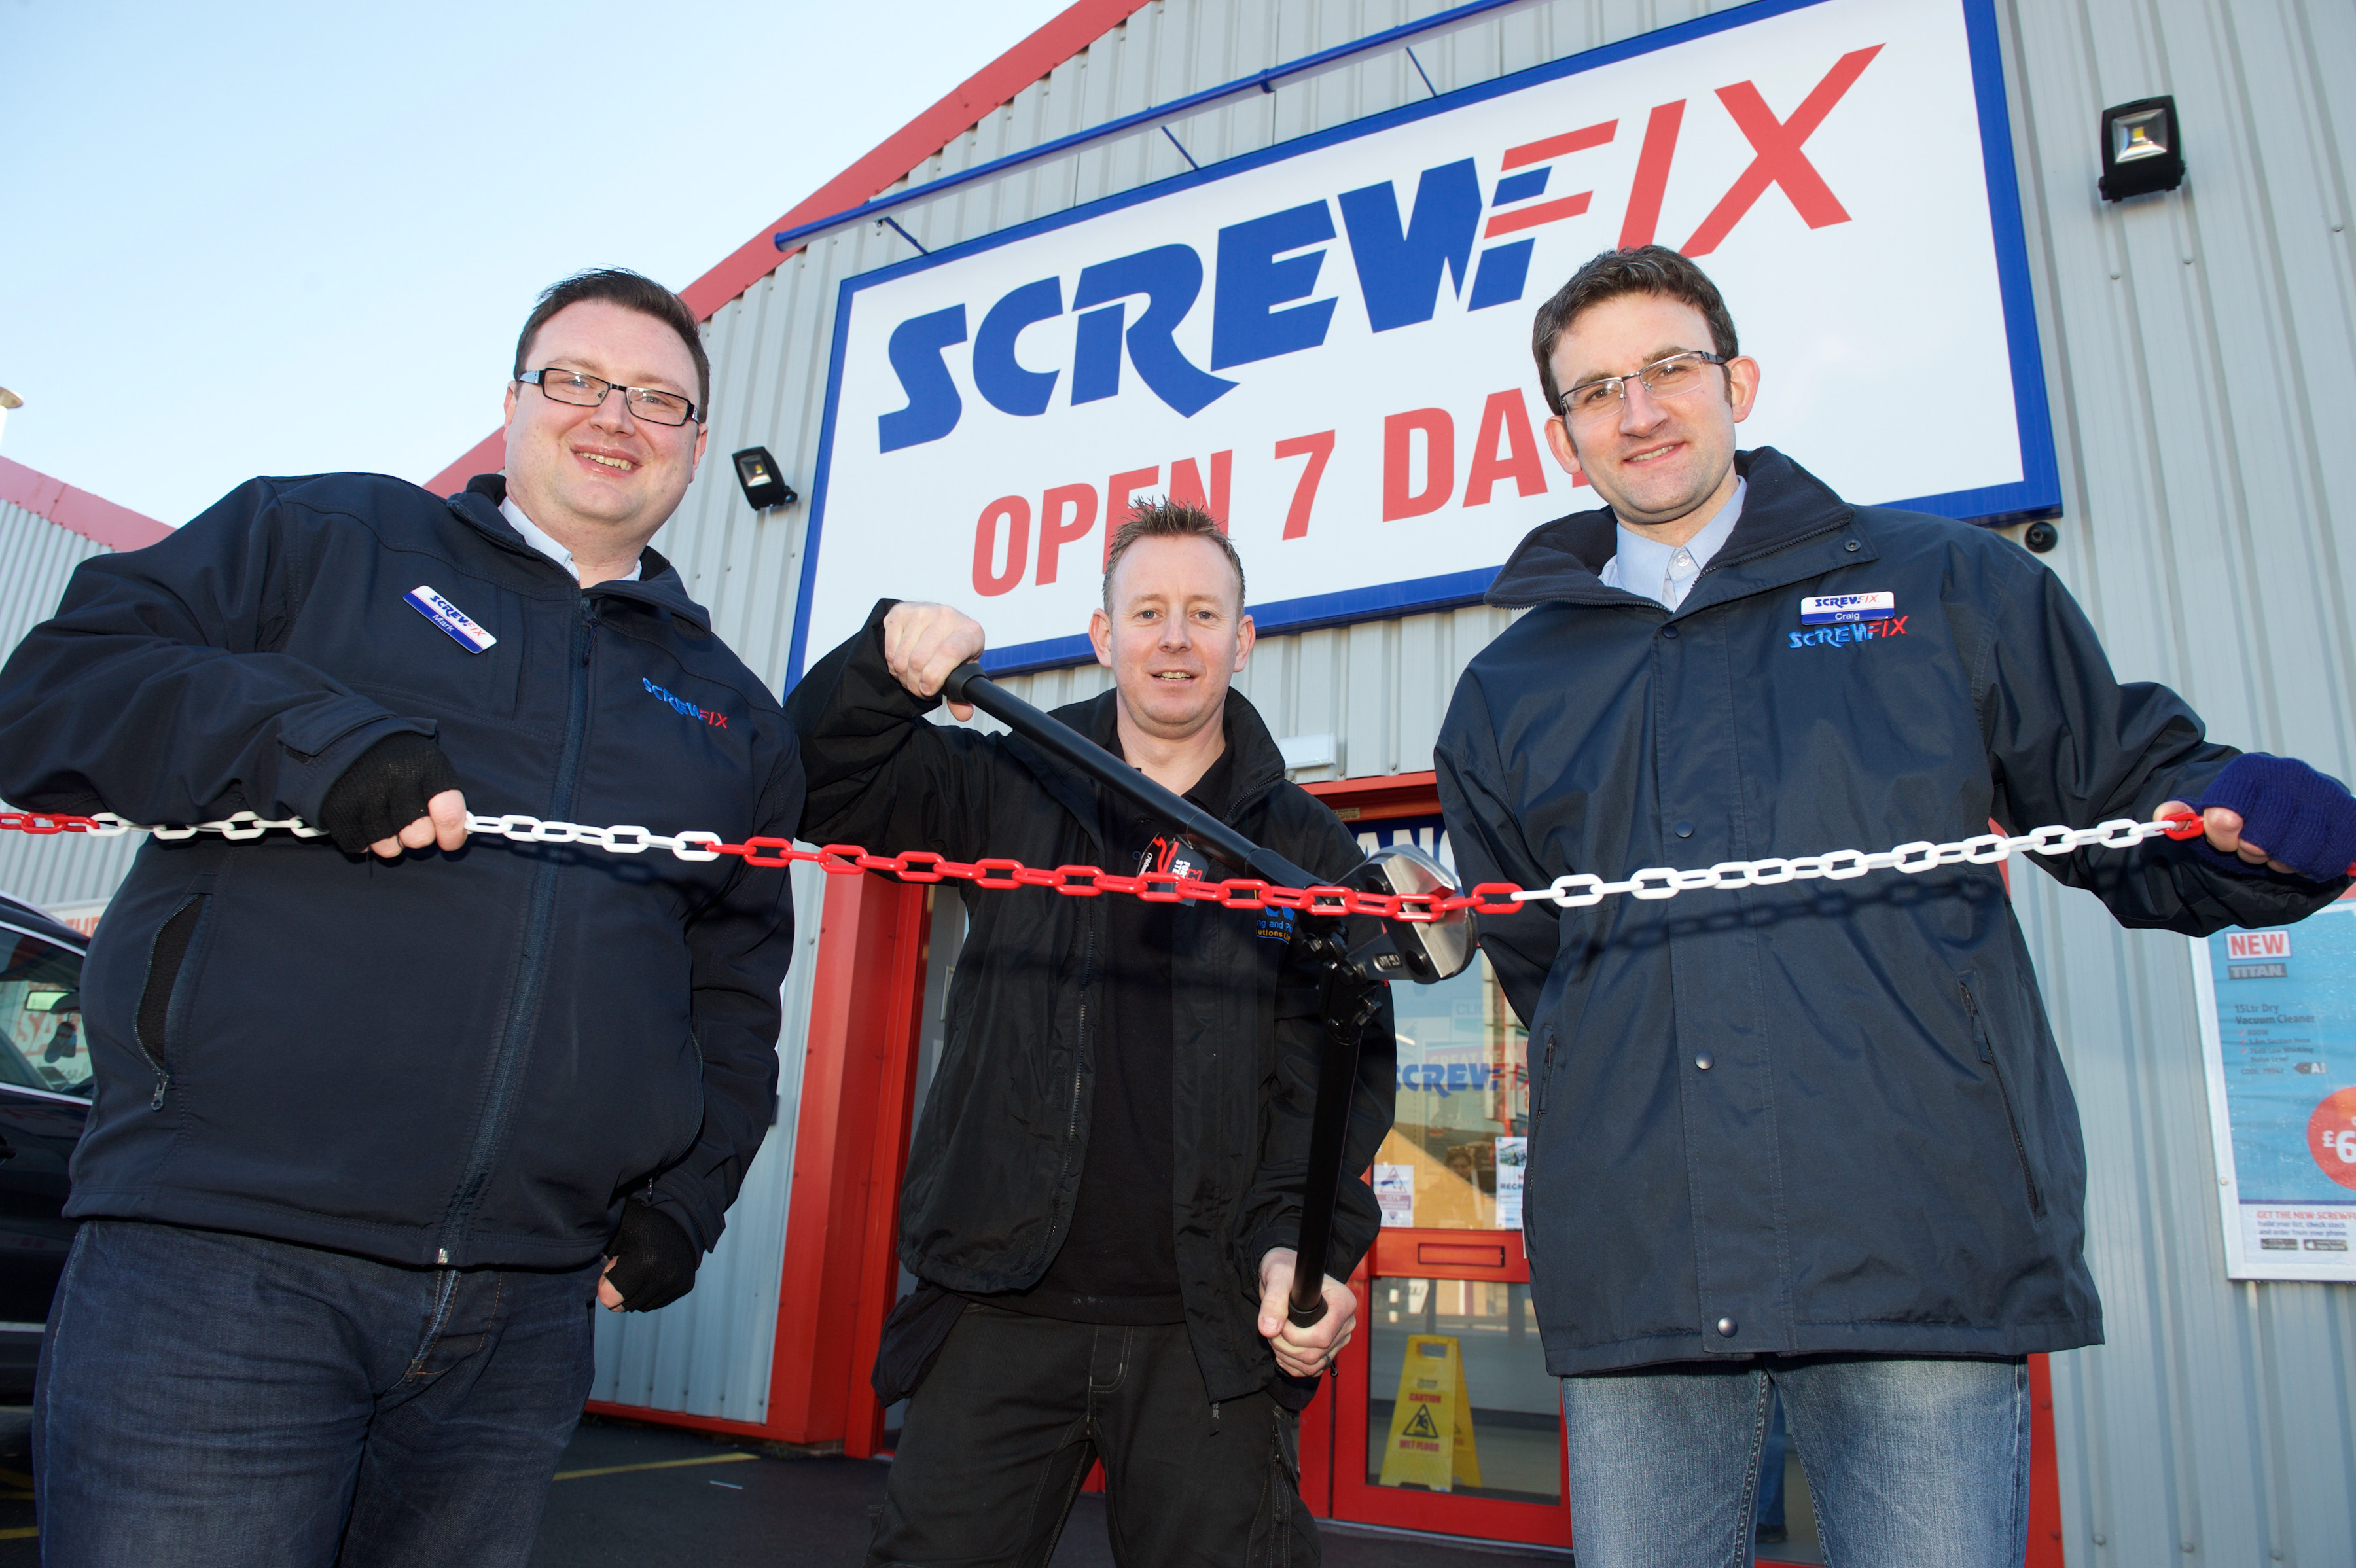 Swinton’s first Screwfix store is declared a runaway success